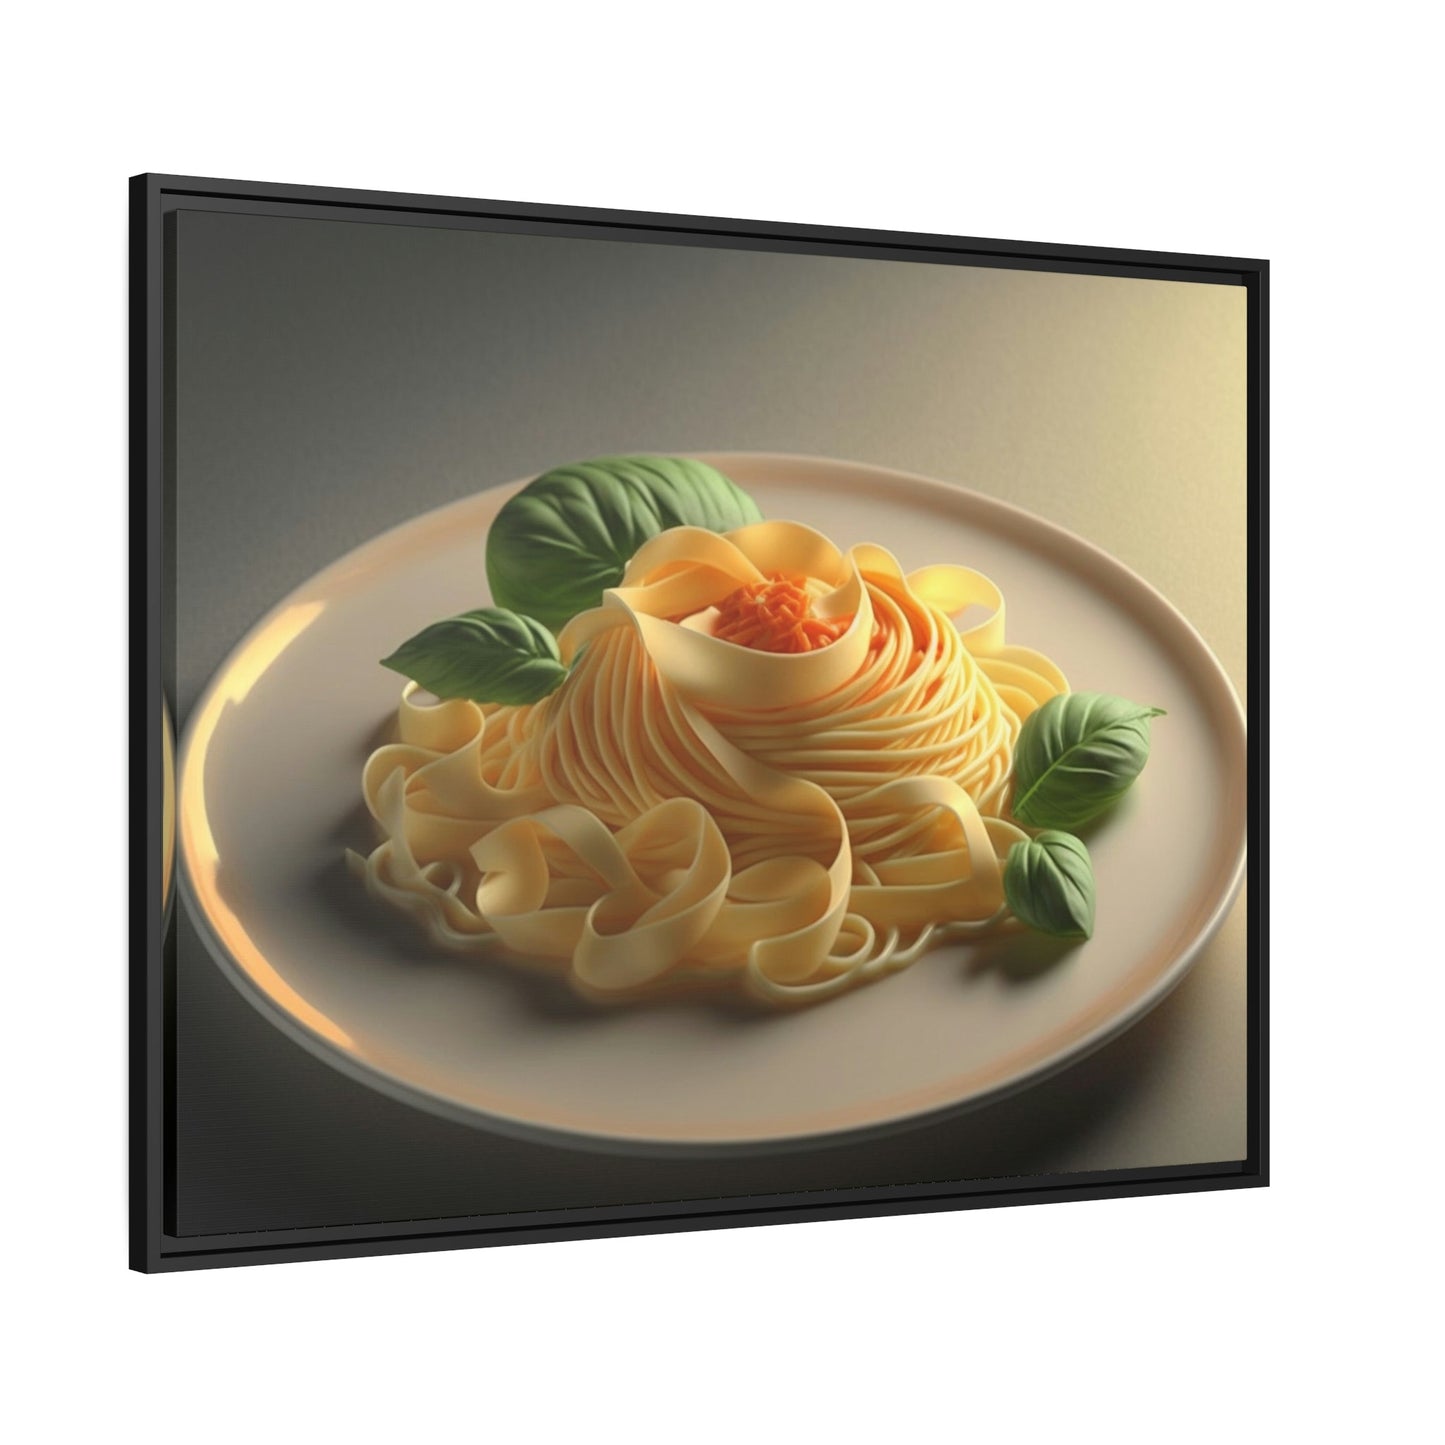 Pasta Perfection: Beautiful Canvas Print of a Plate of Spaghetti